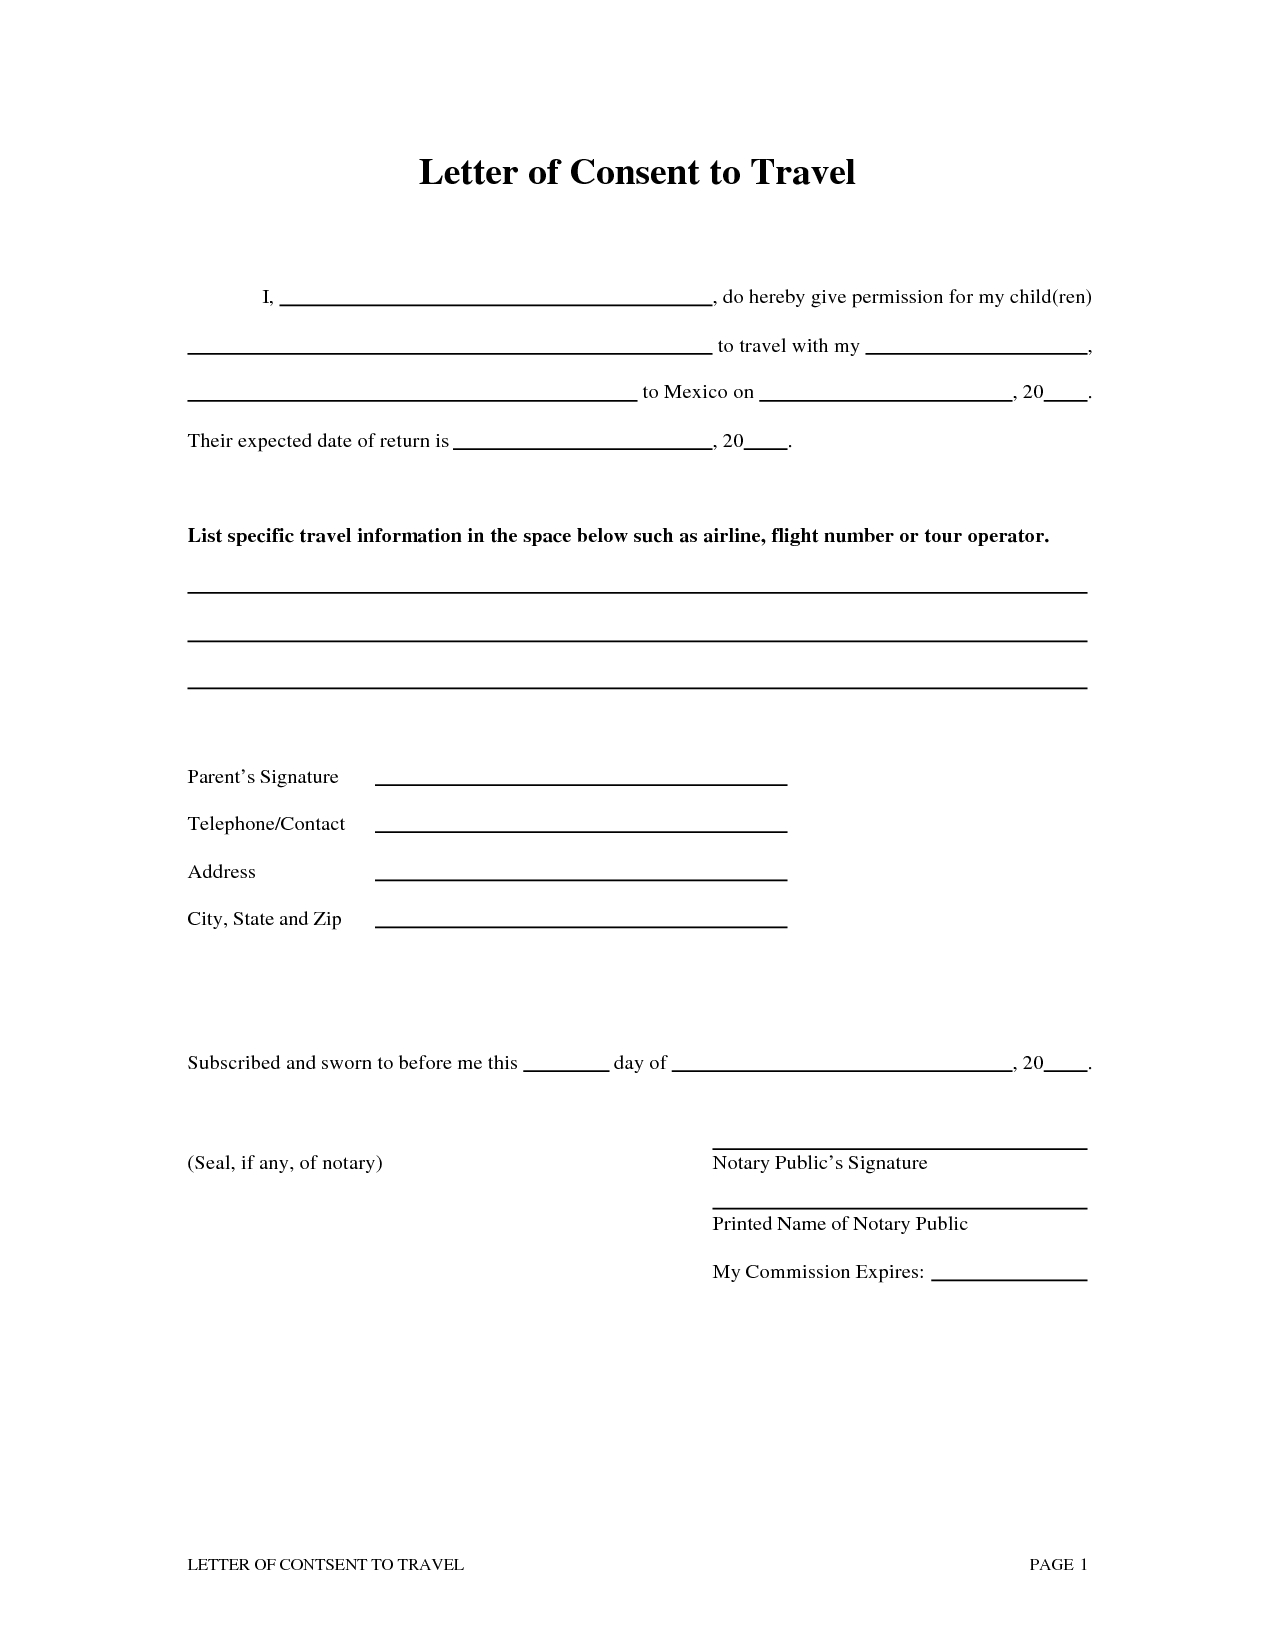 Notarized Travel Consent Letter Template - Inspirational Notarized Letter Template for Child Travel Your